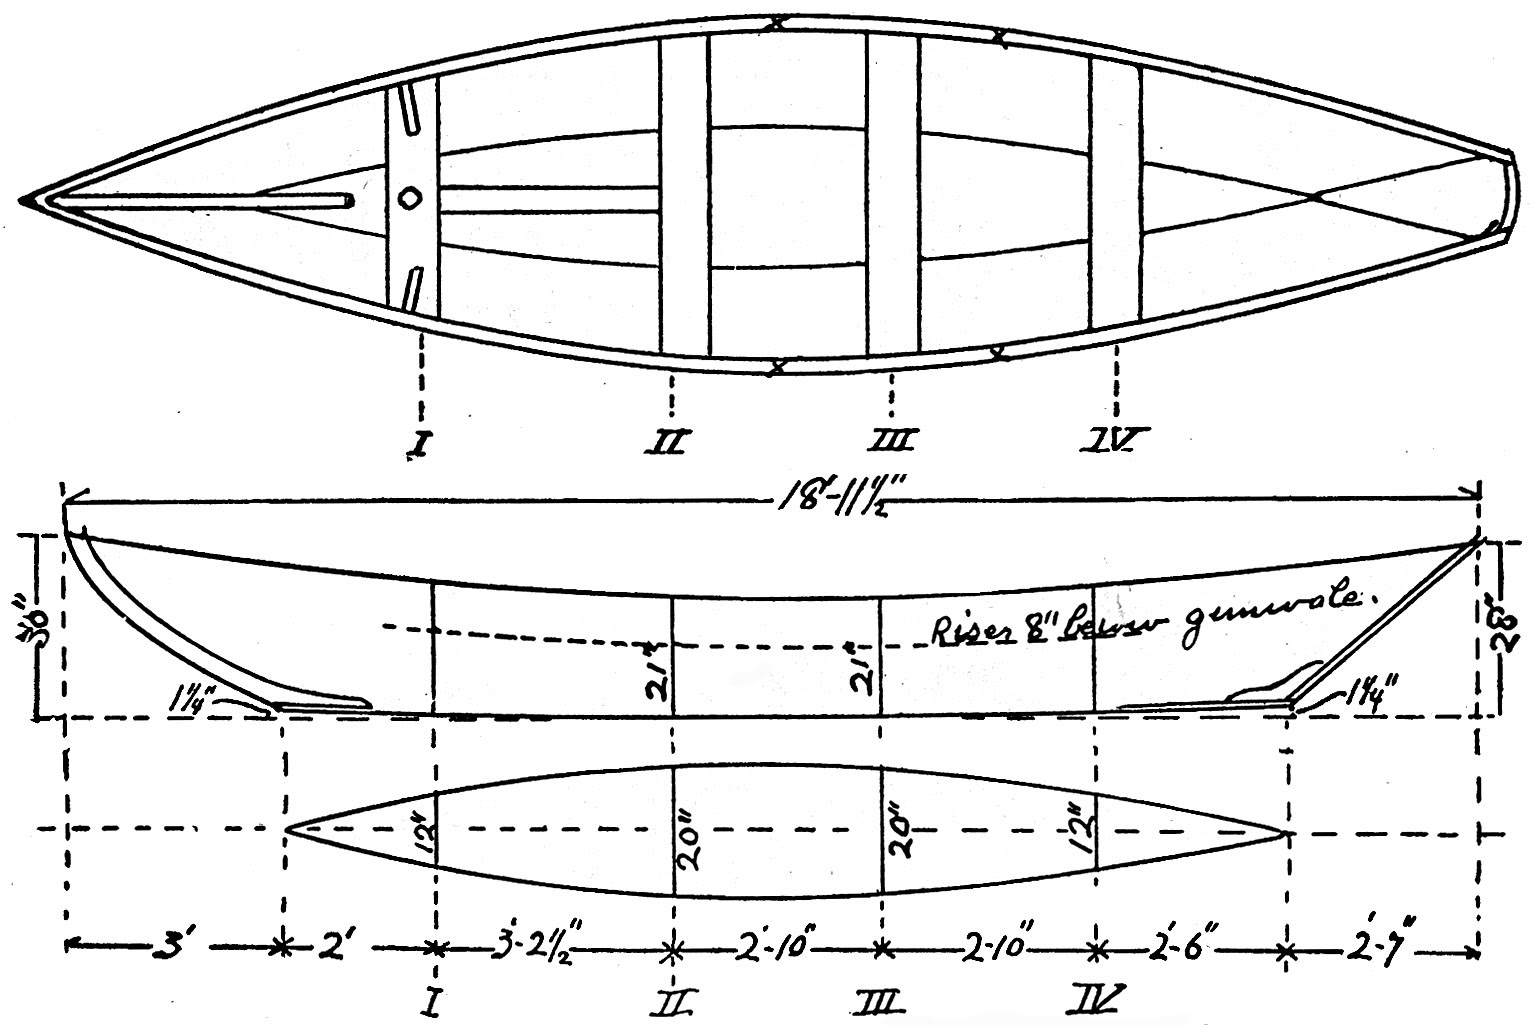 Where to get Flats boat plans images | ciiiips